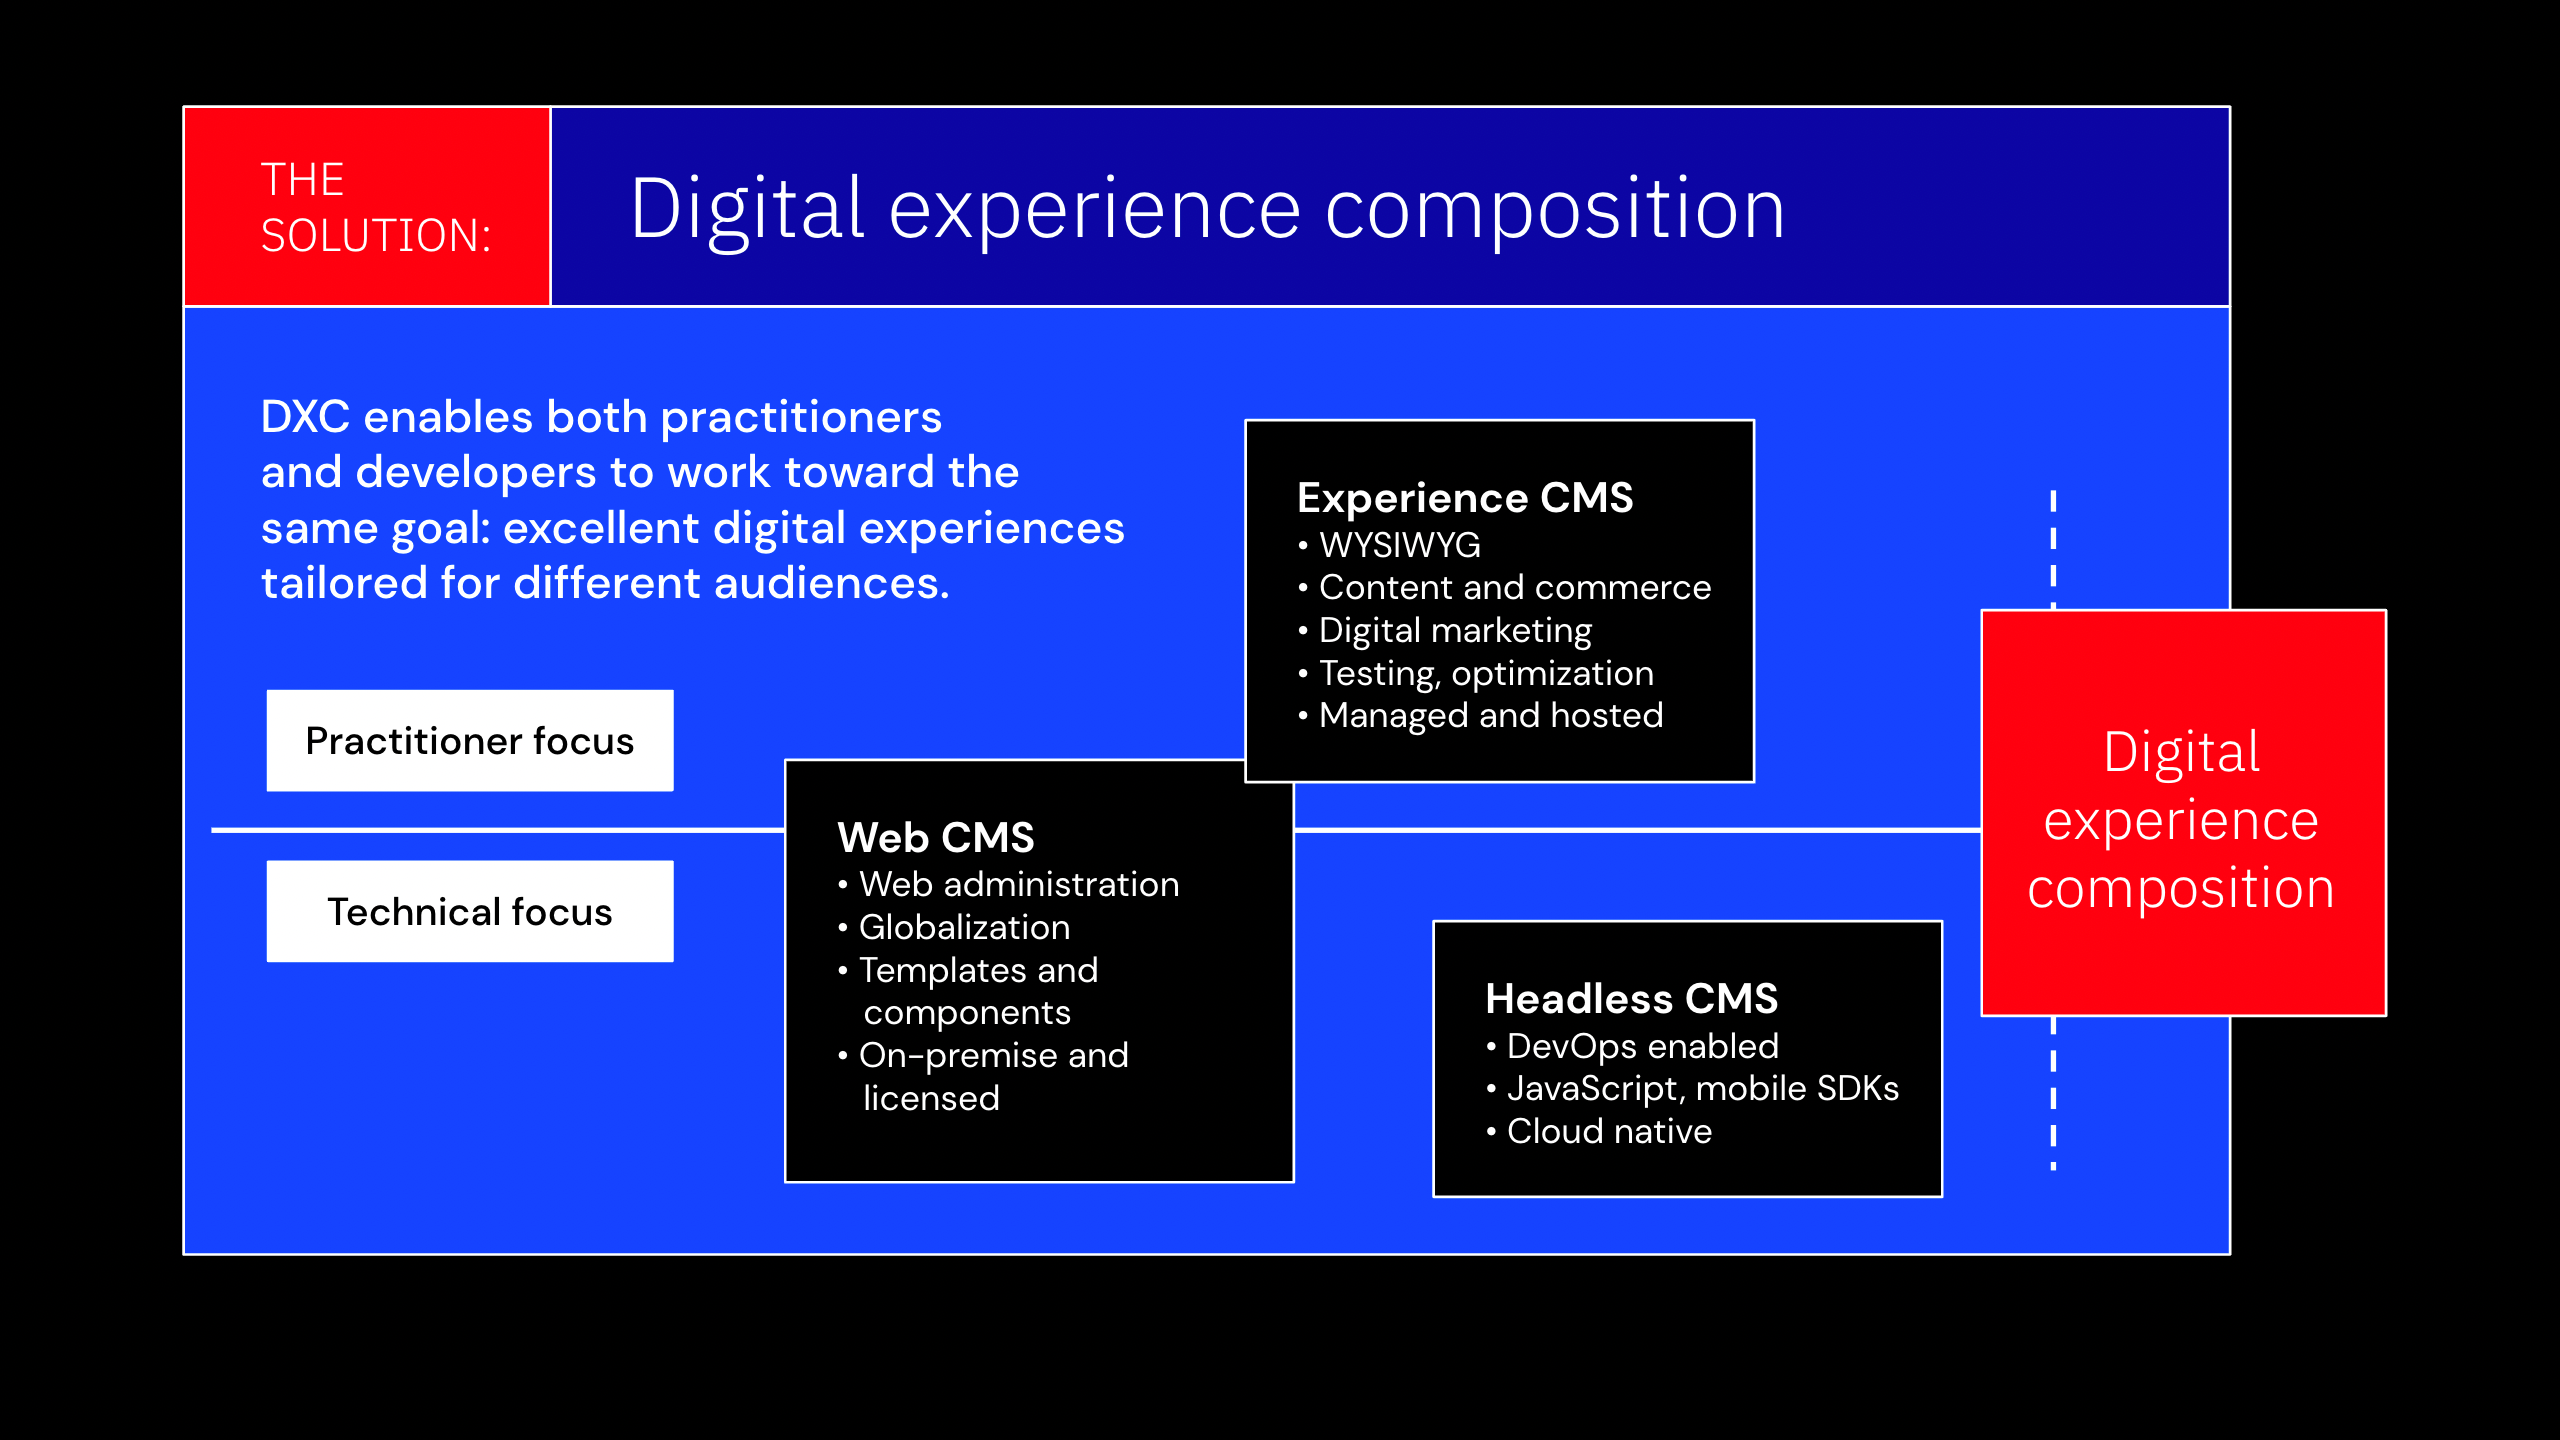 The Solution: Digital experience composition